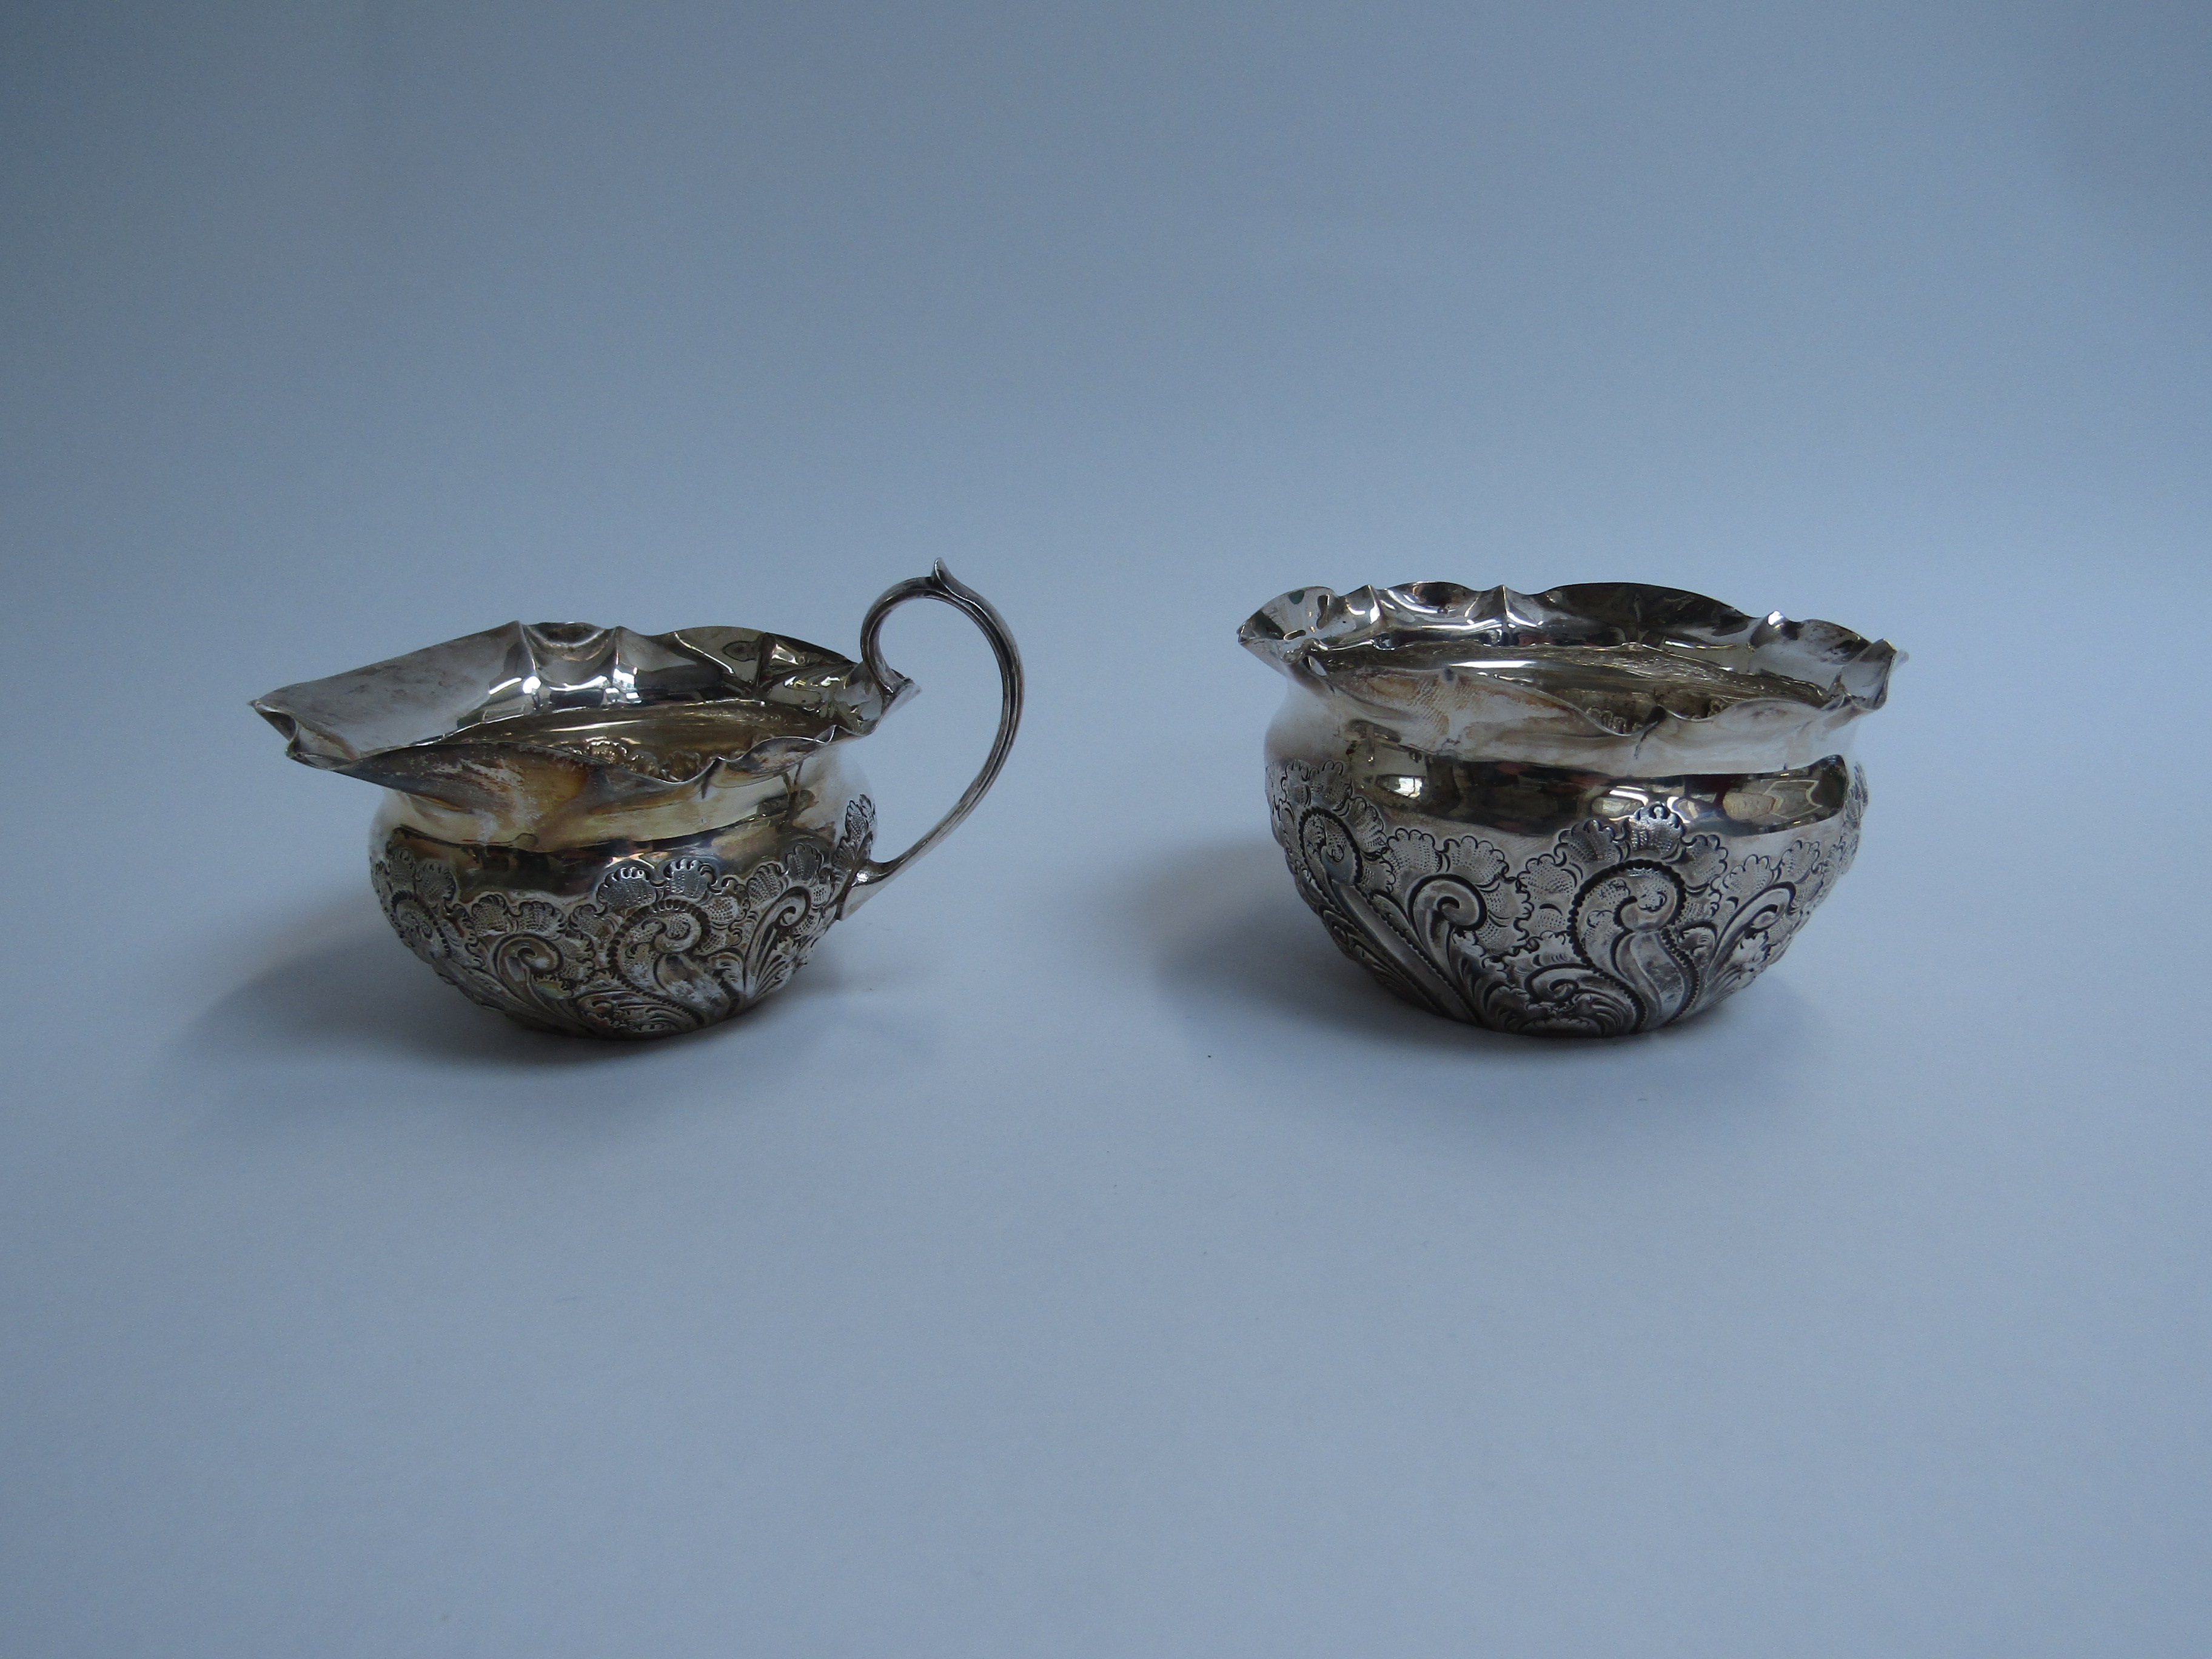 Atkin brothers silver embossed cream jug and sugar bowl Sheffield 1900 (2) 147g (split to lip of - Image 2 of 3